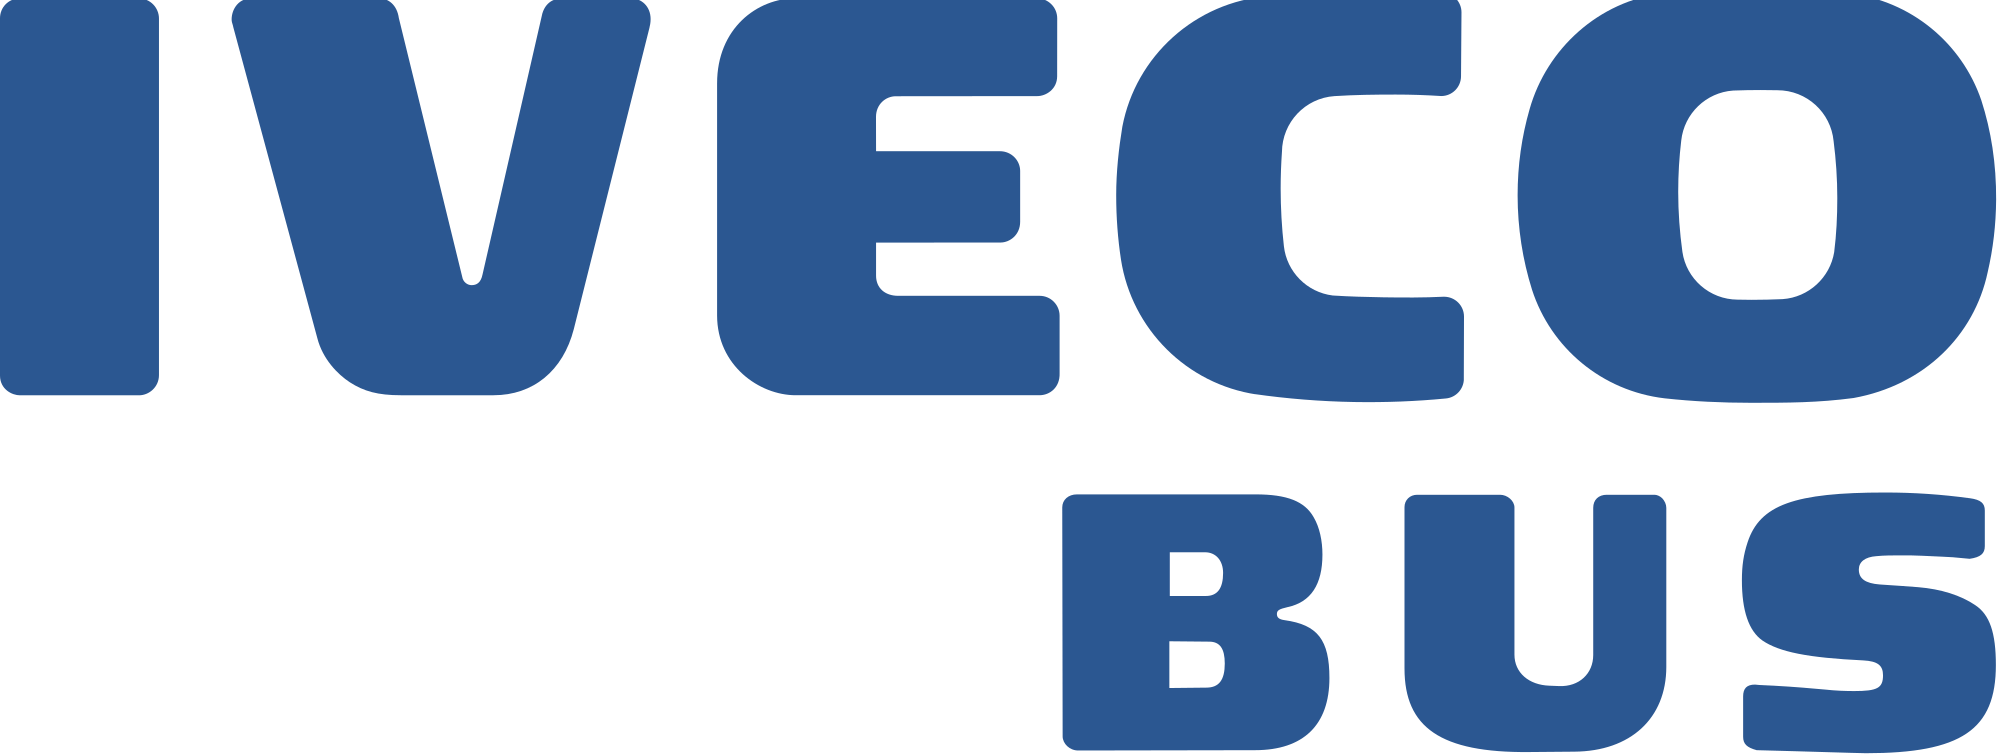 Iveco Logo - File:Iveco Bus logo.svg - Wikimedia Commons